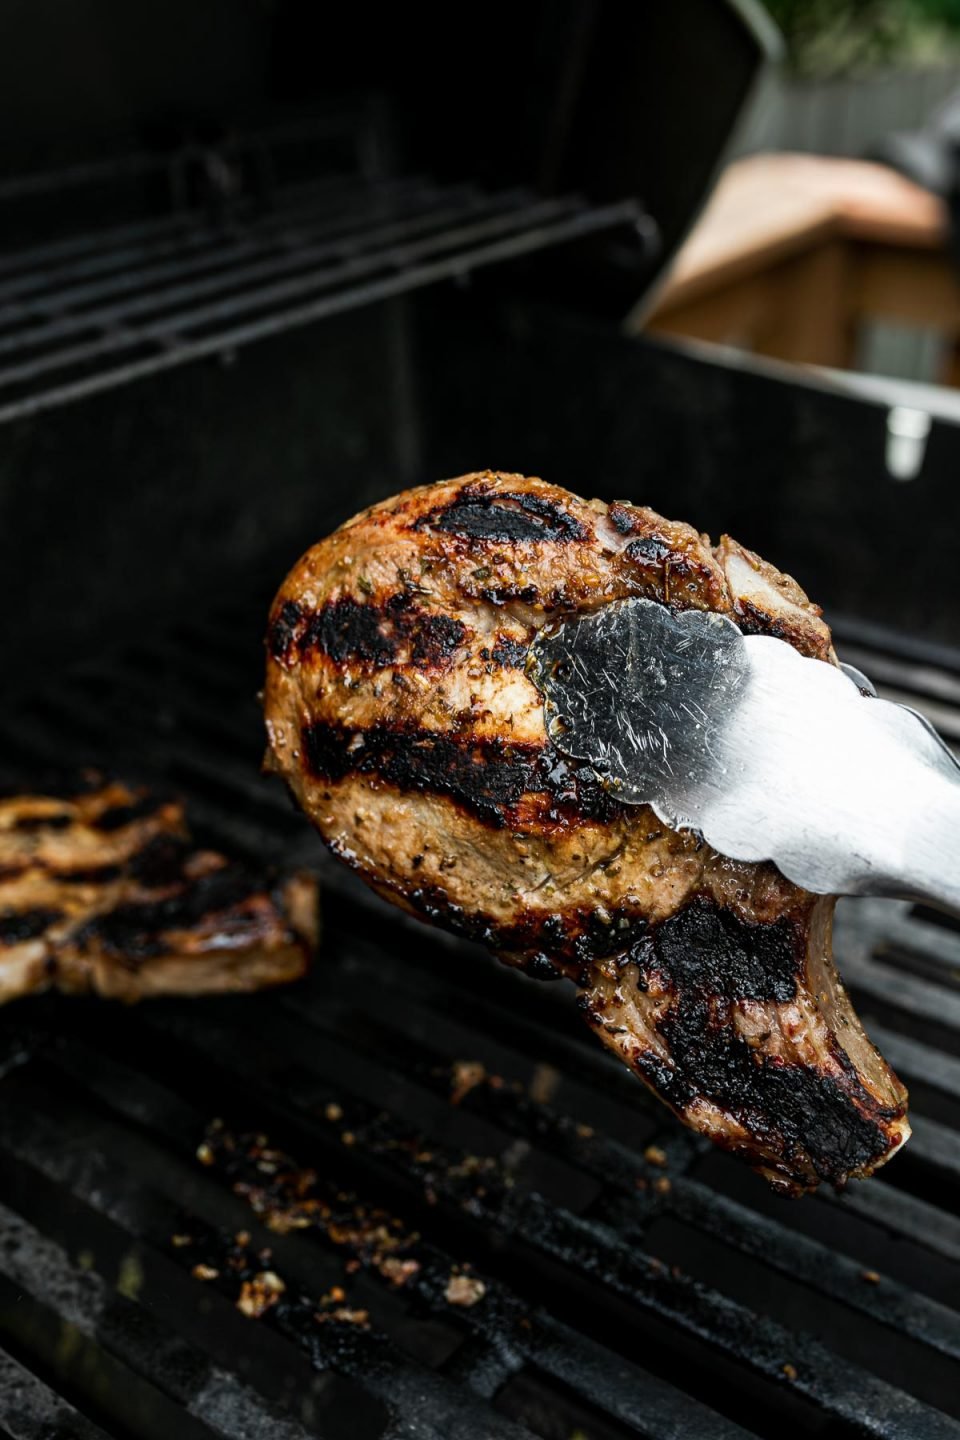 Grill tongs hold a grilled pork chop over grill grates.